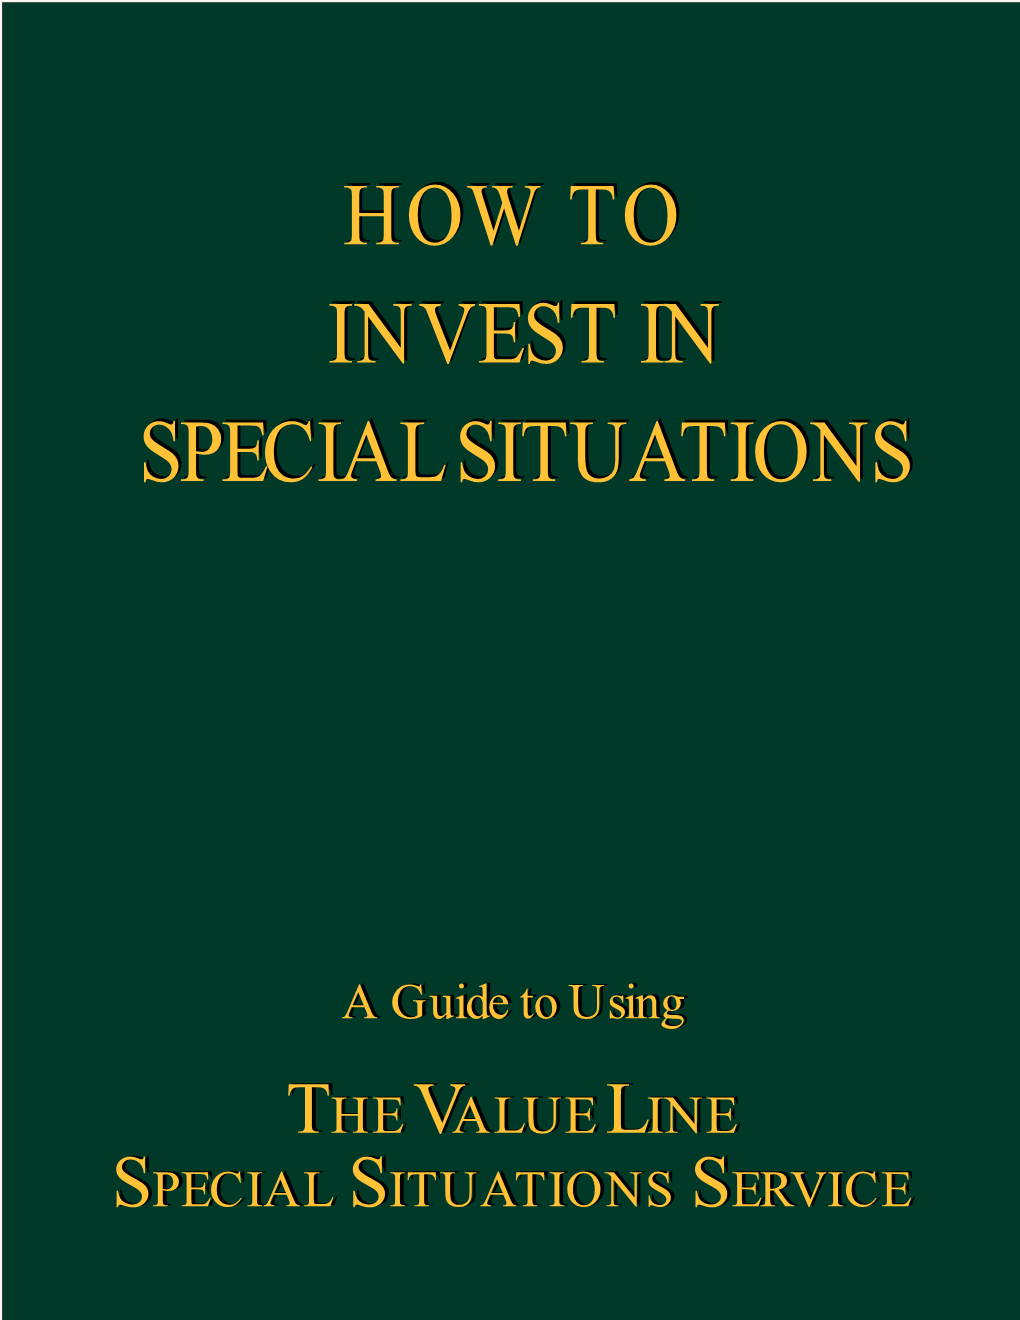 How to Invest in Special Situations